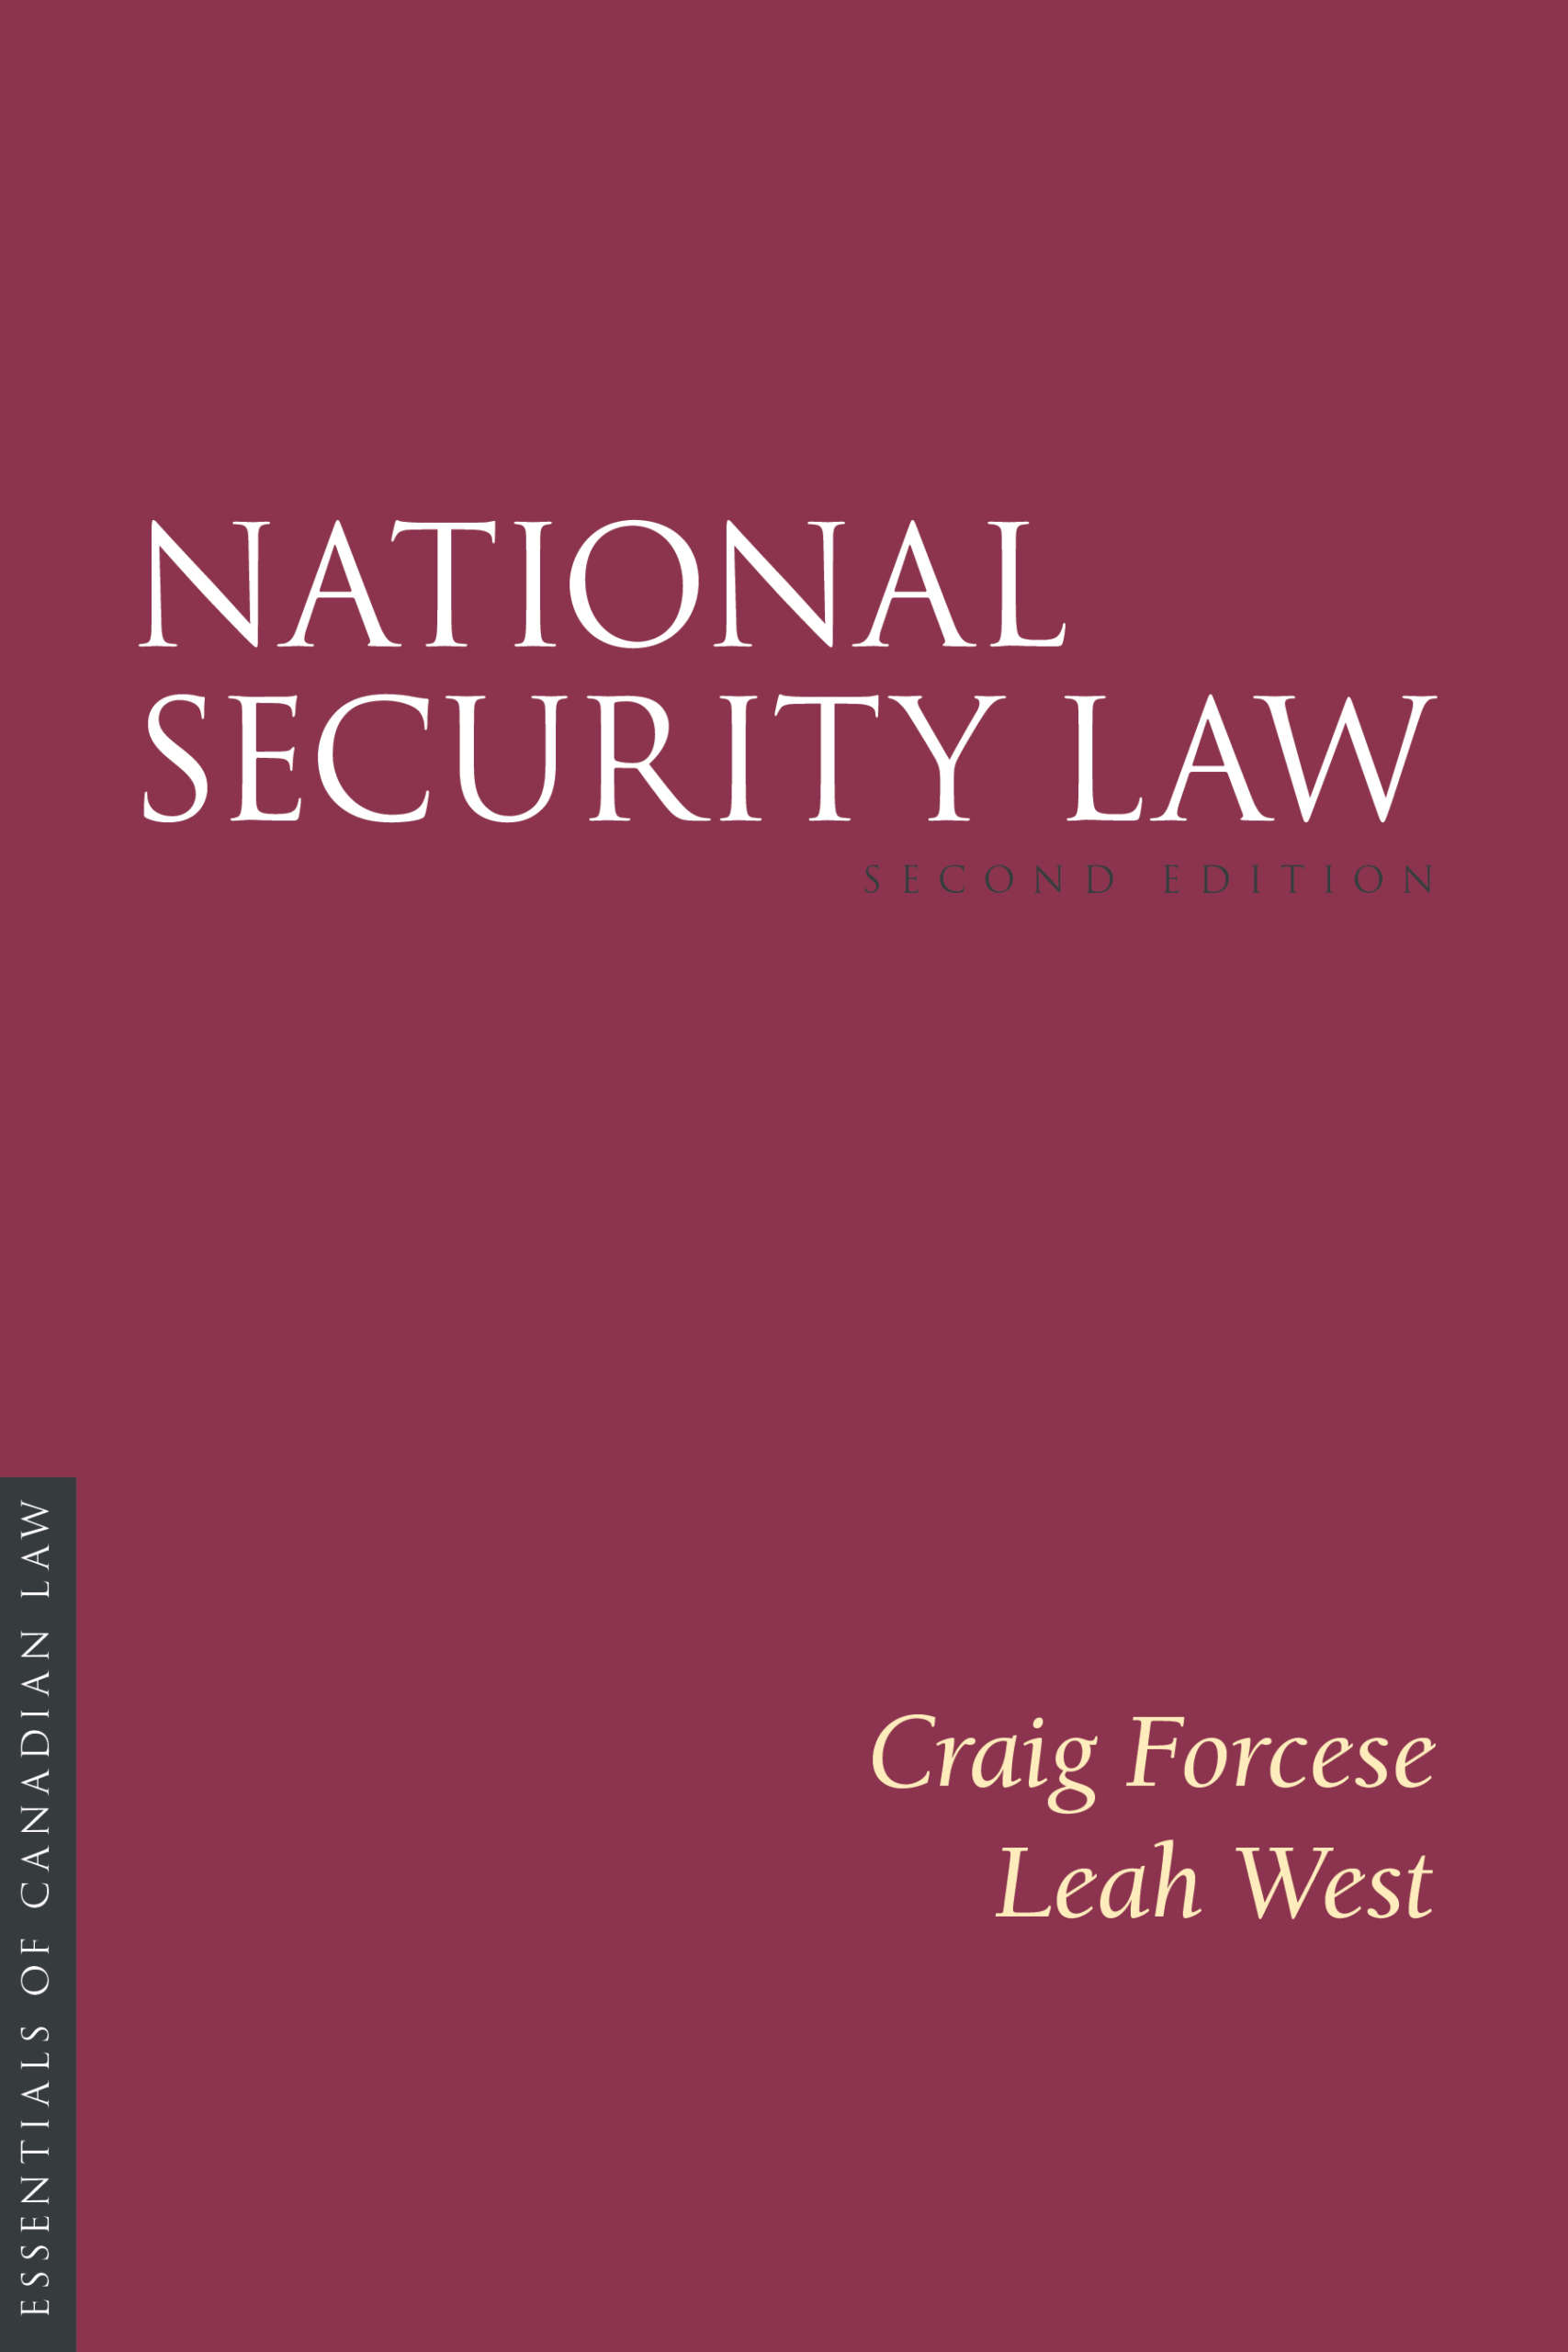 National Security Law, 2/e - Irwin Law